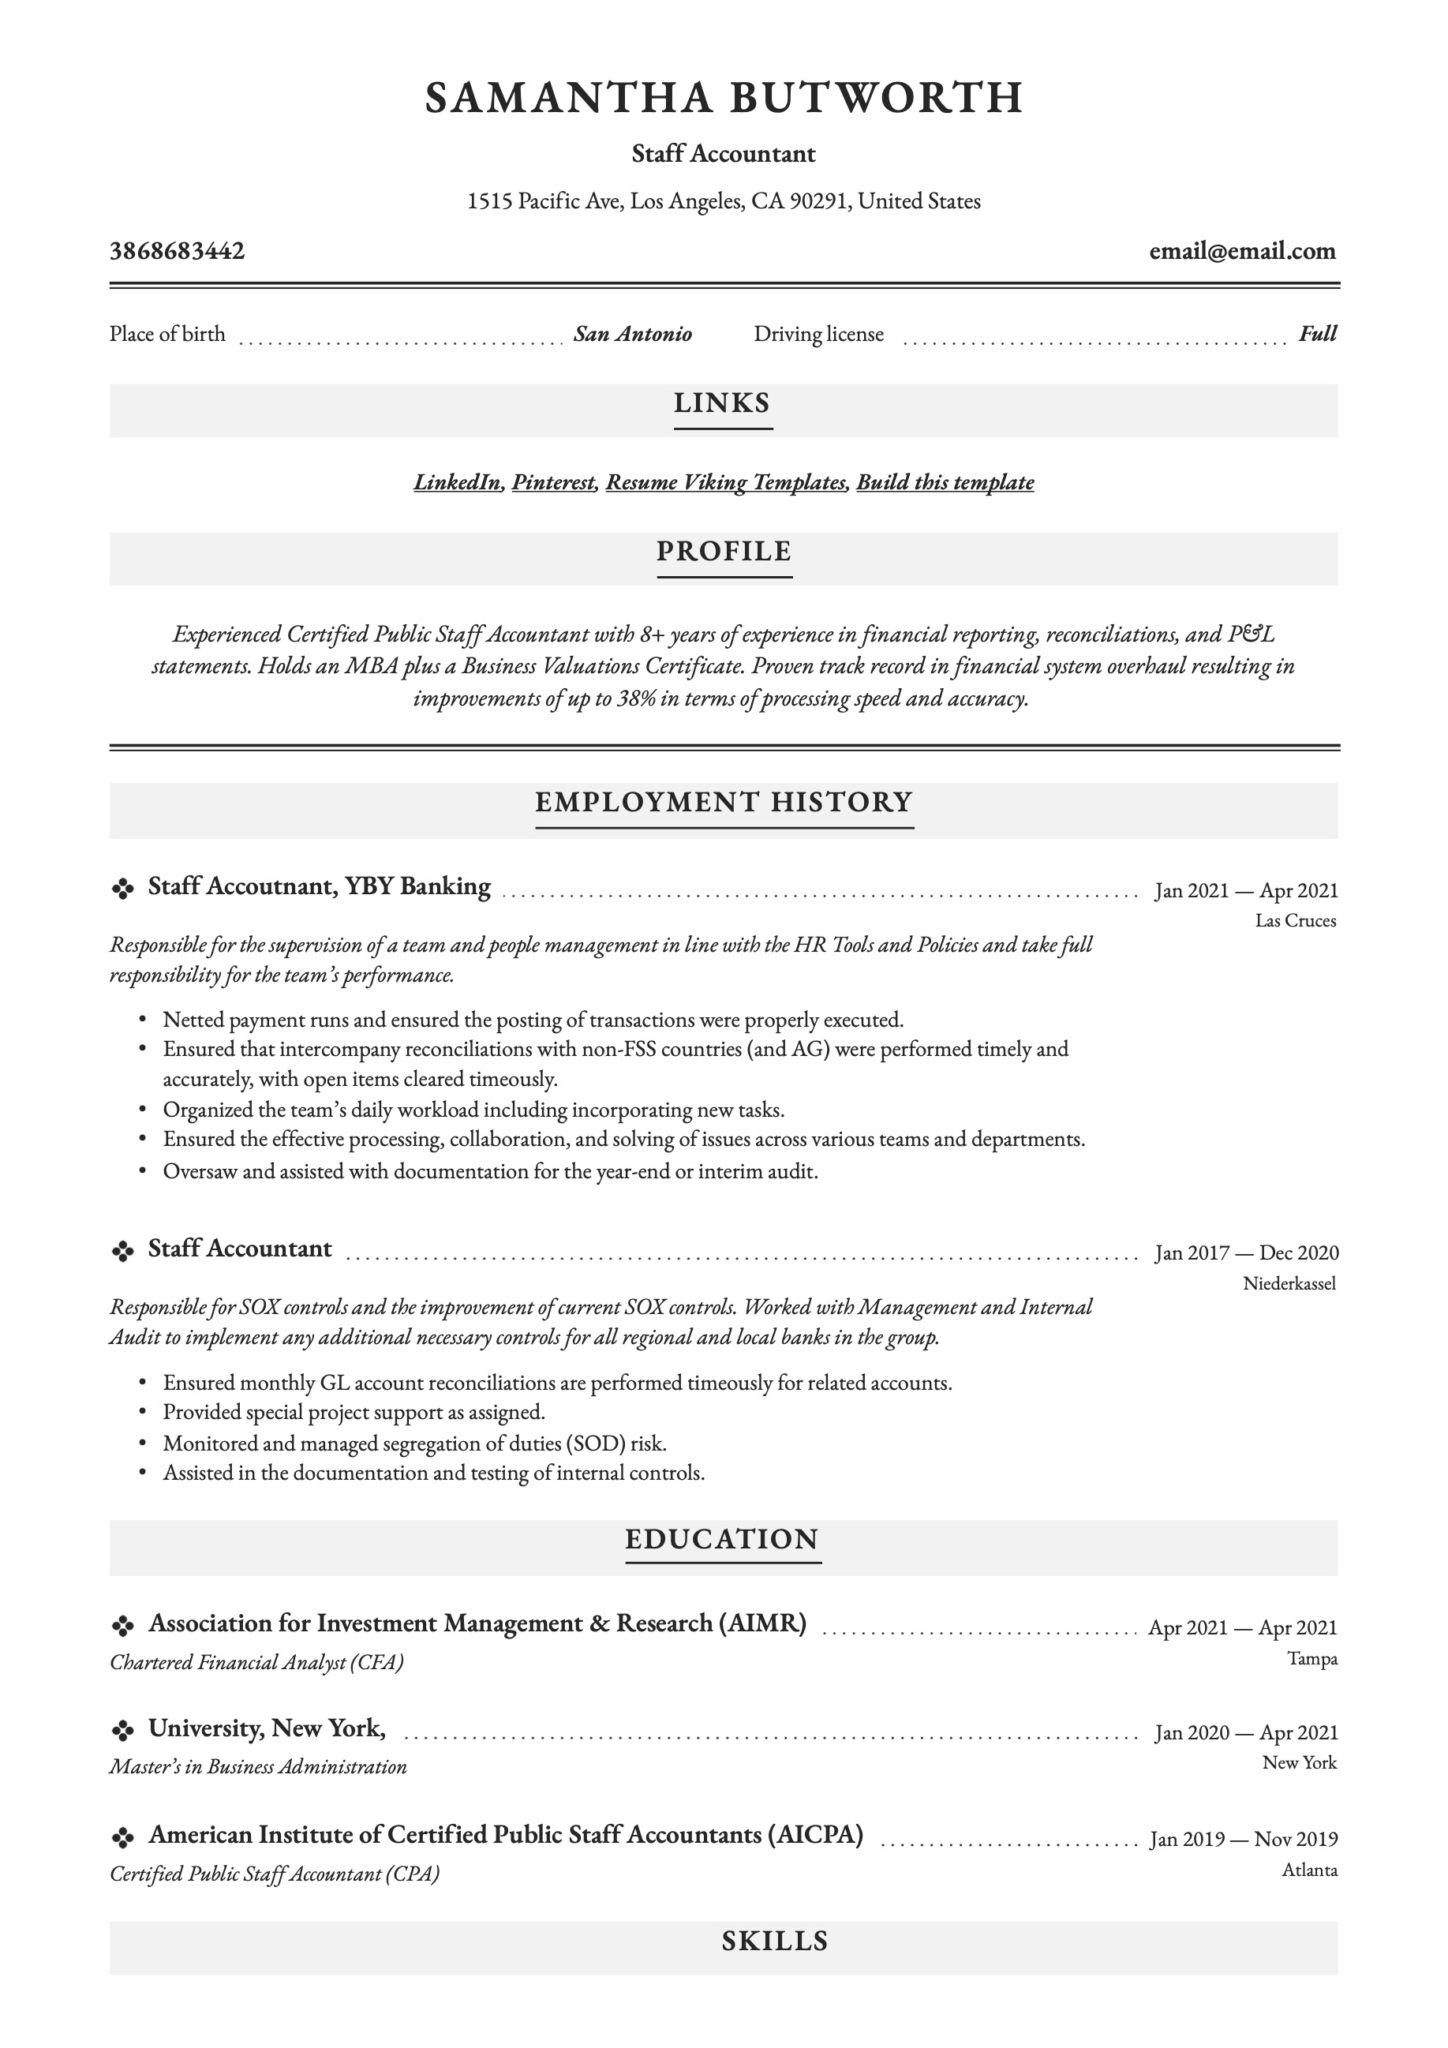 Professional Staff Accountant Resume Example